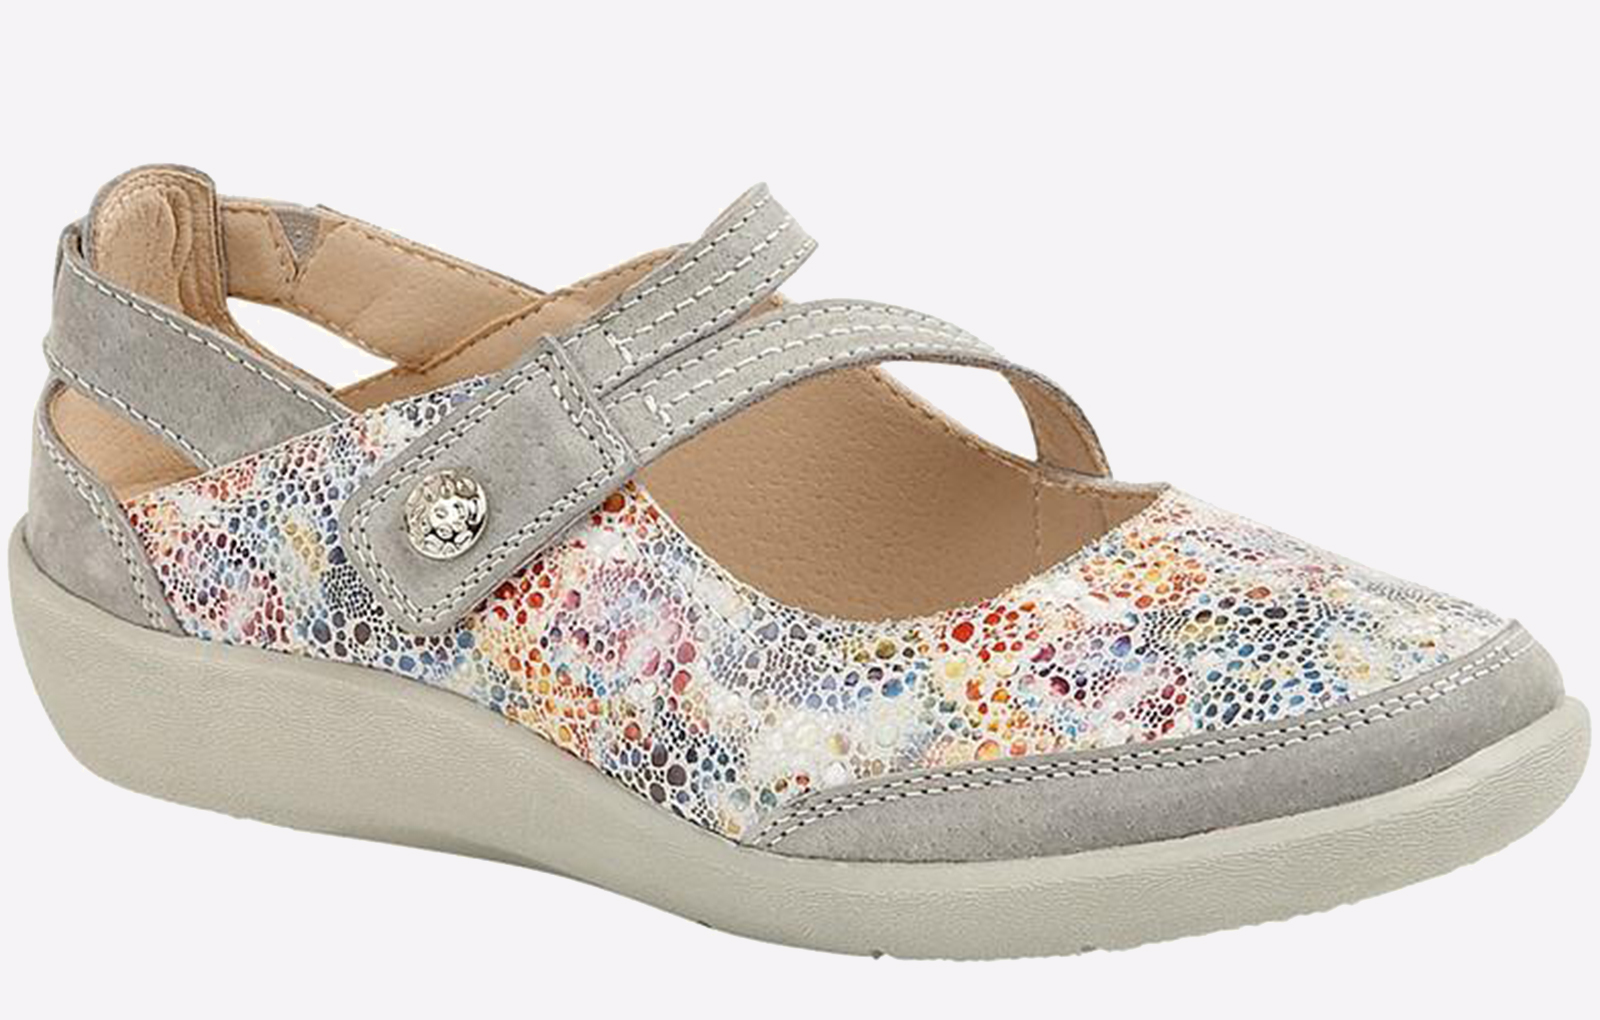 Boulevard Blossom Leather Shoes Womens - GBD-1232